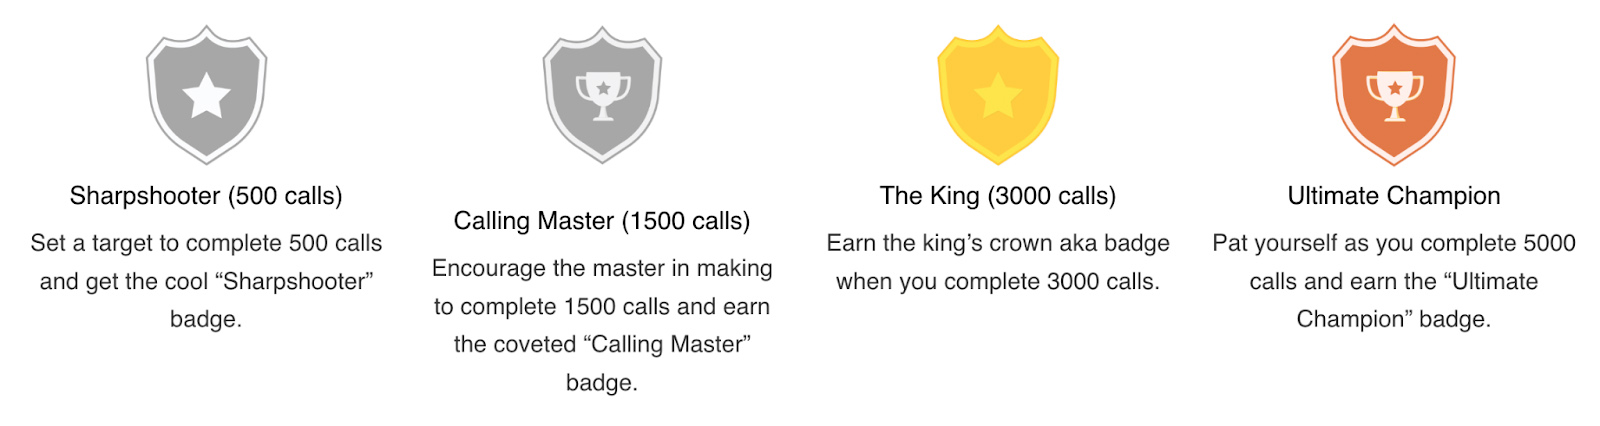 The different types of badges awarded to agents through CallHippo's gamification feature.